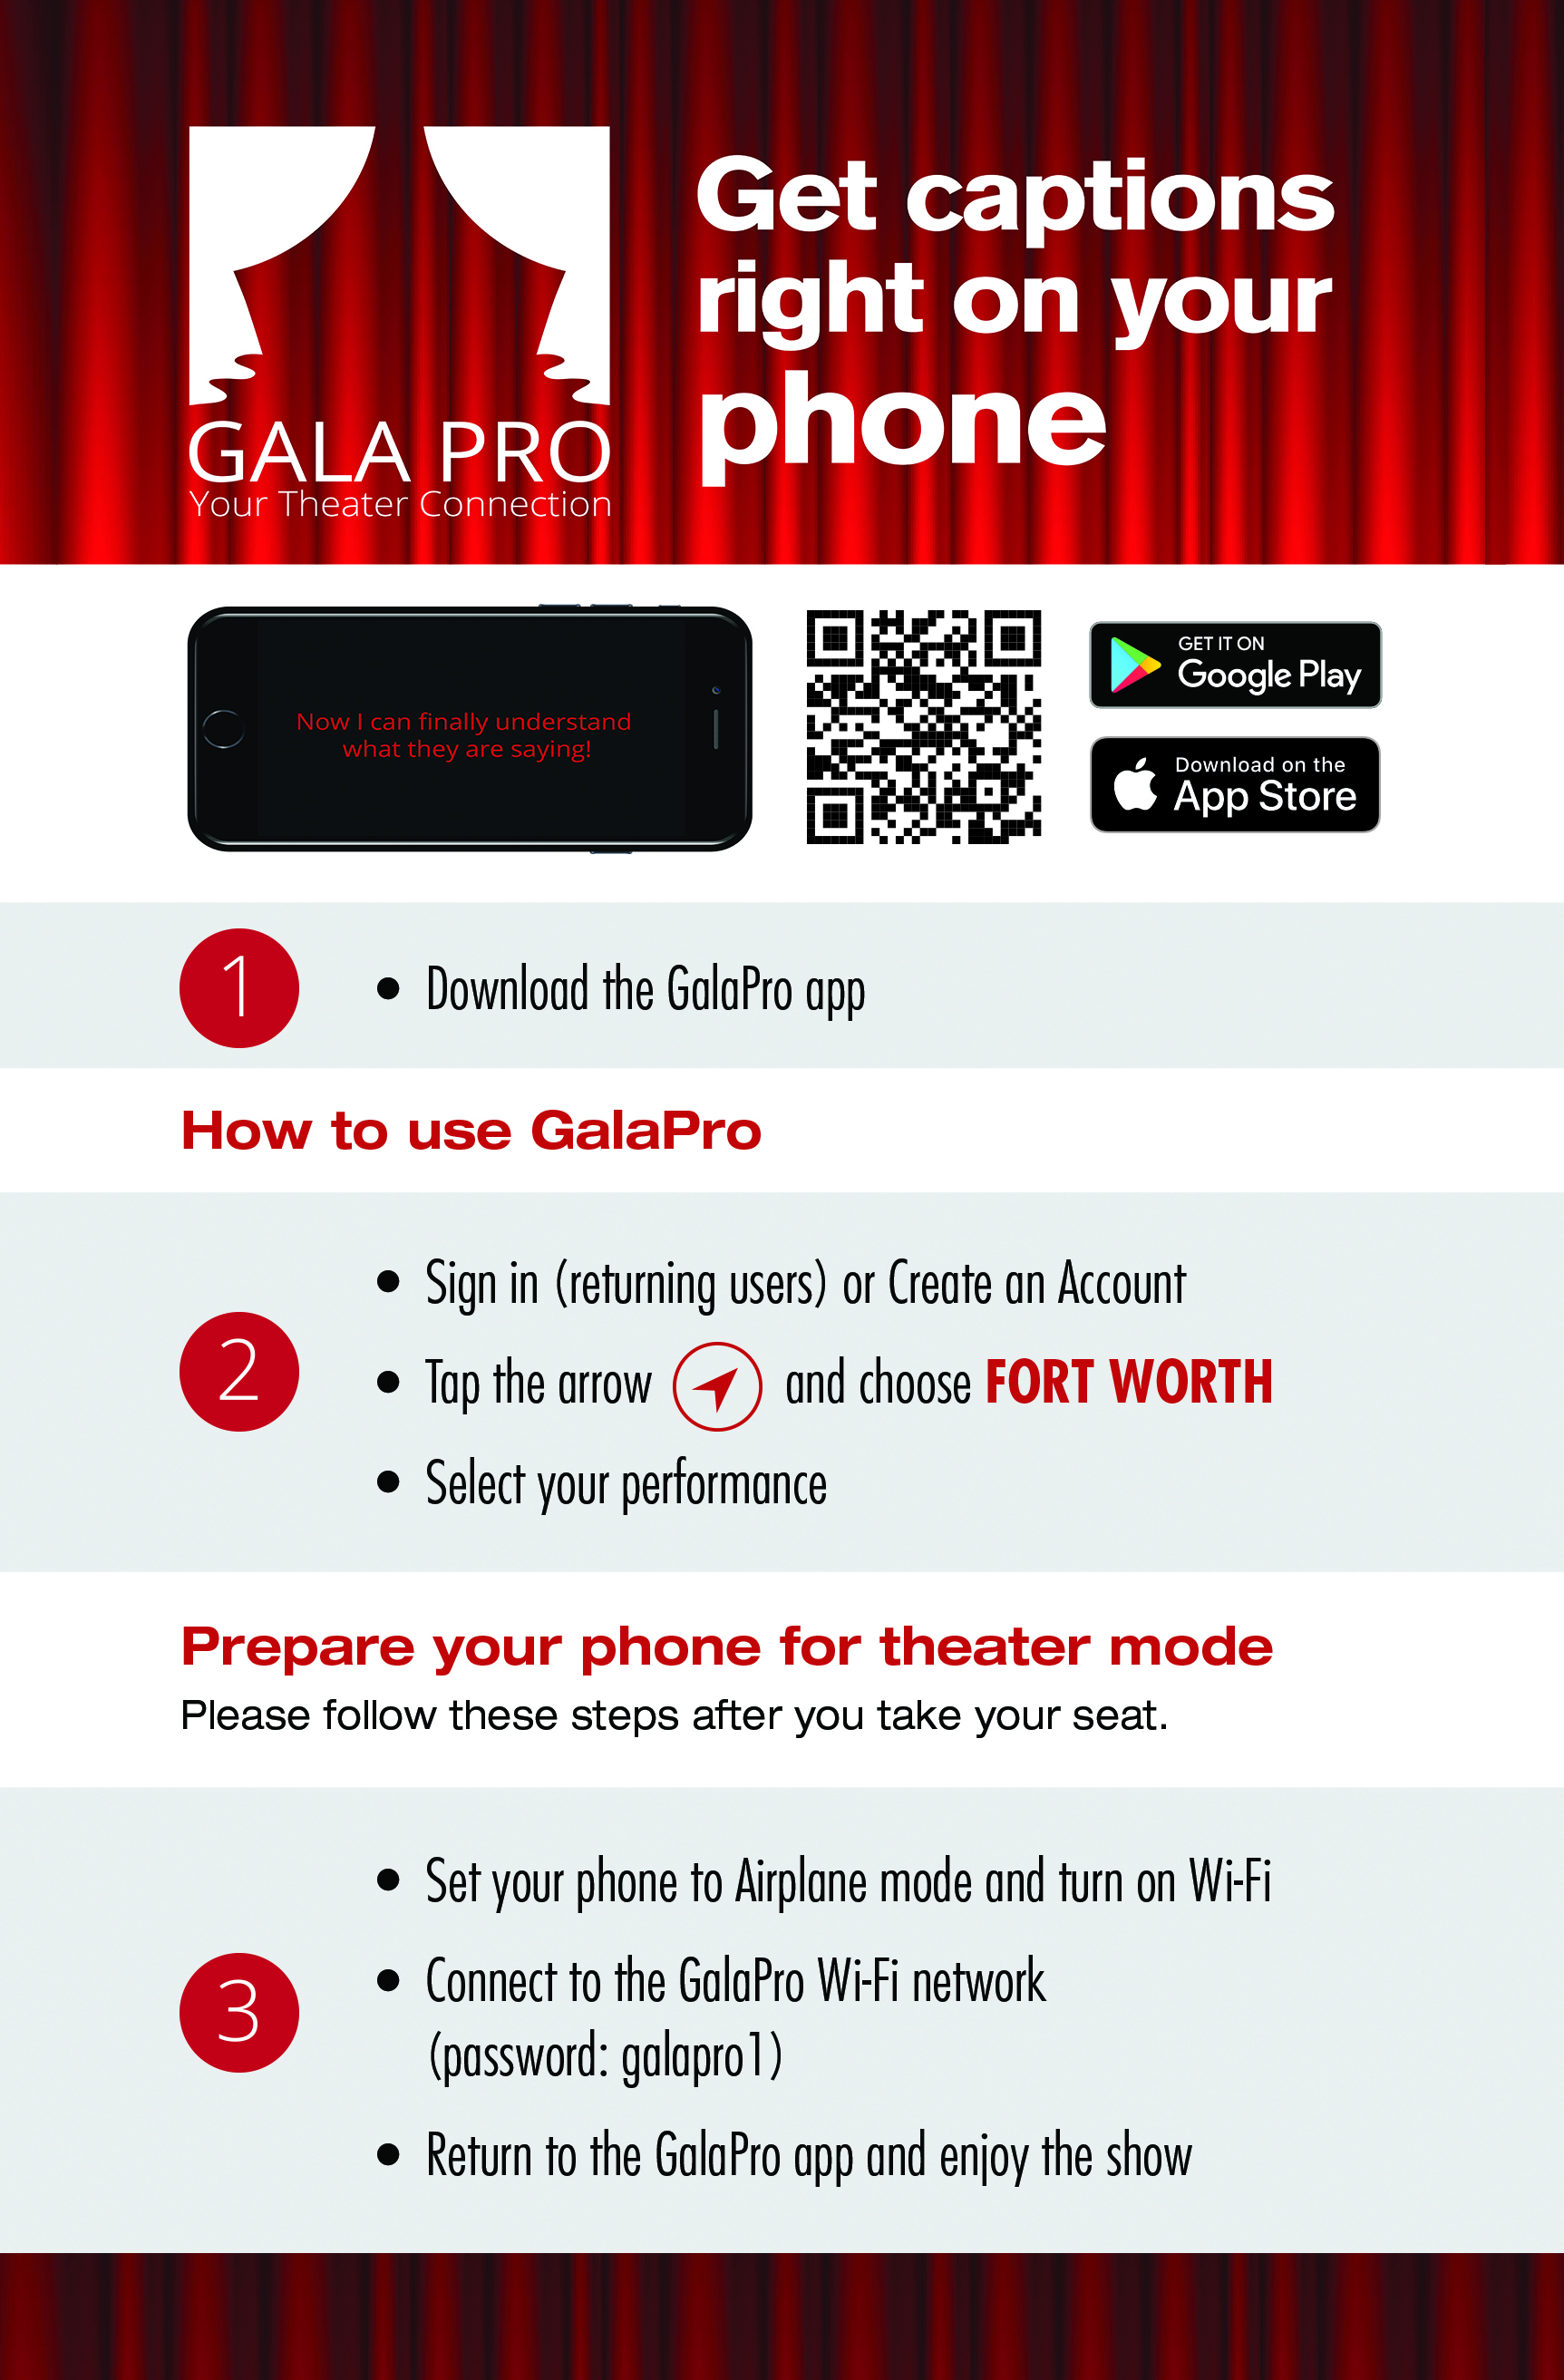 Using the GalaPro App Before you arrive at the theater:  Download GalaPro from the App Store or Google Play.  Search for GalaPro (one word). New users select “Get Started Now” and enter your email and create a password. Tap the compass arrow to select Fort Worth. Choose your performance's title on the home page for show information. When you are in the theater, right before the show:  Set your phone to Airplane mode Turn on Wi-Fi and choose the GalaPro Wi-Fi with the password “galapro1” (all lowercase) Enjoy the show! 